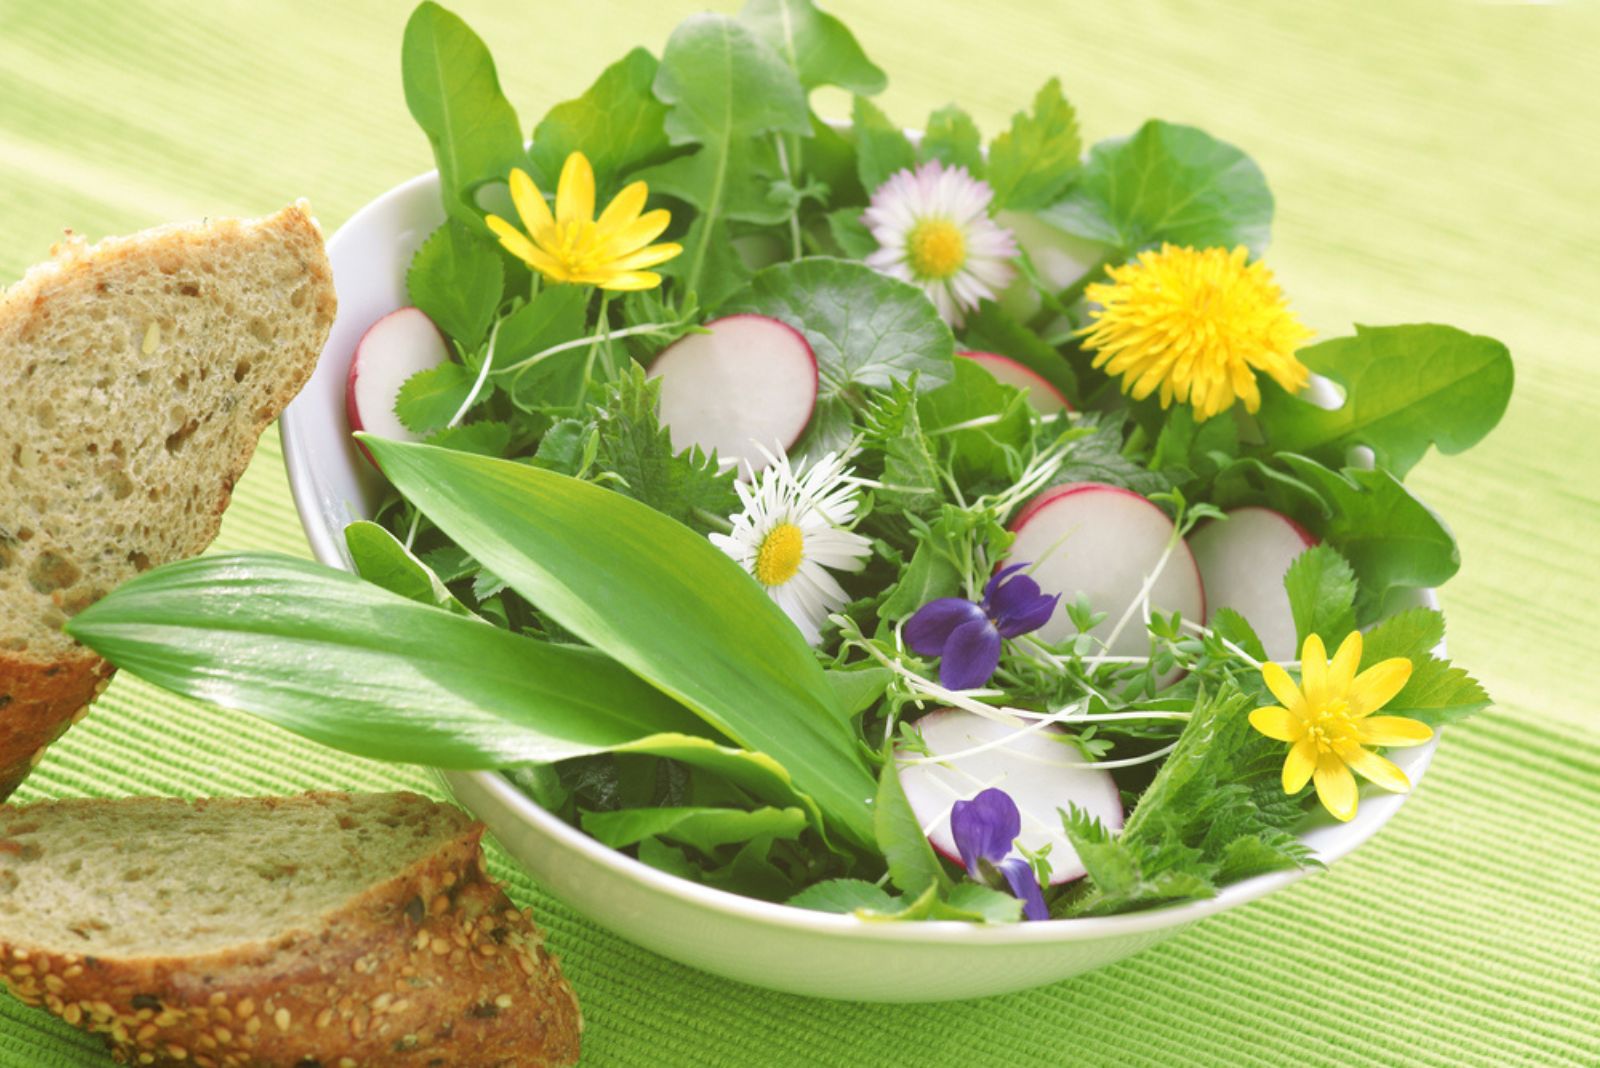 Spring Salad With Wild Herbs